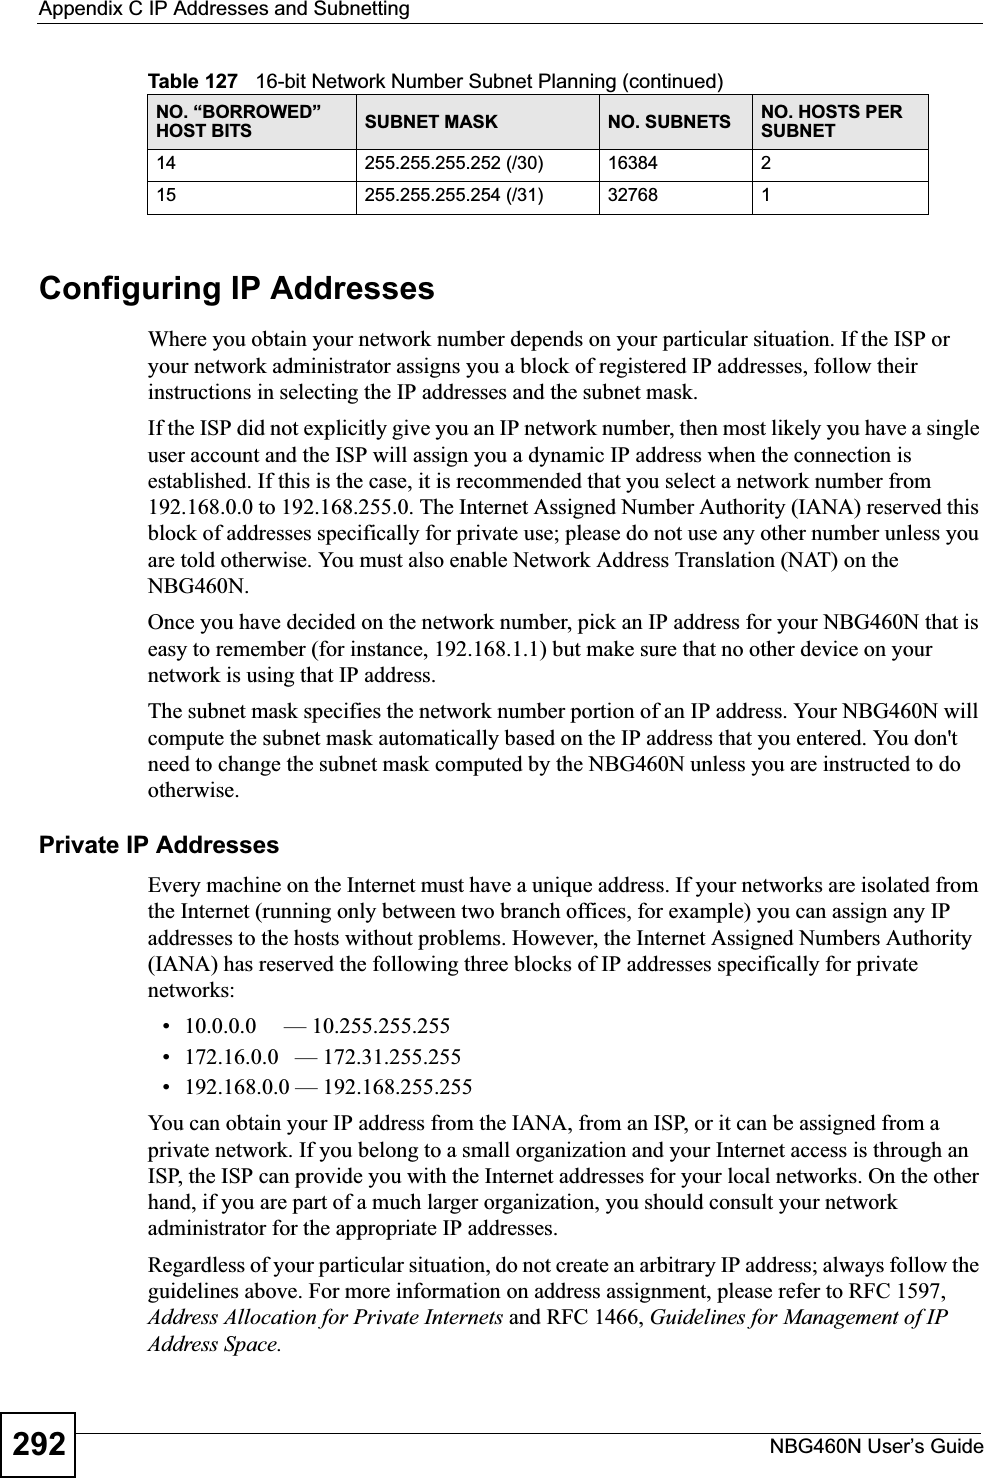 Appendix C IP Addresses and SubnettingNBG460N User’s Guide292Configuring IP AddressesWhere you obtain your network number depends on your particular situation. If the ISP or your network administrator assigns you a block of registered IP addresses, follow their instructions in selecting the IP addresses and the subnet mask.If the ISP did not explicitly give you an IP network number, then most likely you have a single user account and the ISP will assign you a dynamic IP address when the connection is established. If this is the case, it is recommended that you select a network number from 192.168.0.0 to 192.168.255.0. The Internet Assigned Number Authority (IANA) reserved this block of addresses specifically for private use; please do not use any other number unless you are told otherwise. You must also enable Network Address Translation (NAT) on the NBG460N.Once you have decided on the network number, pick an IP address for your NBG460N that is easy to remember (for instance, 192.168.1.1) but make sure that no other device on your network is using that IP address.The subnet mask specifies the network number portion of an IP address. Your NBG460N will compute the subnet mask automatically based on the IP address that you entered. You don&apos;t need to change the subnet mask computed by the NBG460N unless you are instructed to do otherwise.Private IP AddressesEvery machine on the Internet must have a unique address. If your networks are isolated from the Internet (running only between two branch offices, for example) you can assign any IP addresses to the hosts without problems. However, the Internet Assigned Numbers Authority (IANA) has reserved the following three blocks of IP addresses specifically for private networks:• 10.0.0.0     — 10.255.255.255• 172.16.0.0   — 172.31.255.255• 192.168.0.0 — 192.168.255.255You can obtain your IP address from the IANA, from an ISP, or it can be assigned from a private network. If you belong to a small organization and your Internet access is through an ISP, the ISP can provide you with the Internet addresses for your local networks. On the other hand, if you are part of a much larger organization, you should consult your network administrator for the appropriate IP addresses.Regardless of your particular situation, do not create an arbitrary IP address; always follow the guidelines above. For more information on address assignment, please refer to RFC 1597, Address Allocation for Private Internets and RFC 1466, Guidelines for Management of IP Address Space.14 255.255.255.252 (/30) 16384 215 255.255.255.254 (/31) 32768 1Table 127   16-bit Network Number Subnet Planning (continued)NO. “BORROWED” HOST BITS SUBNET MASK NO. SUBNETS NO. HOSTS PER SUBNET